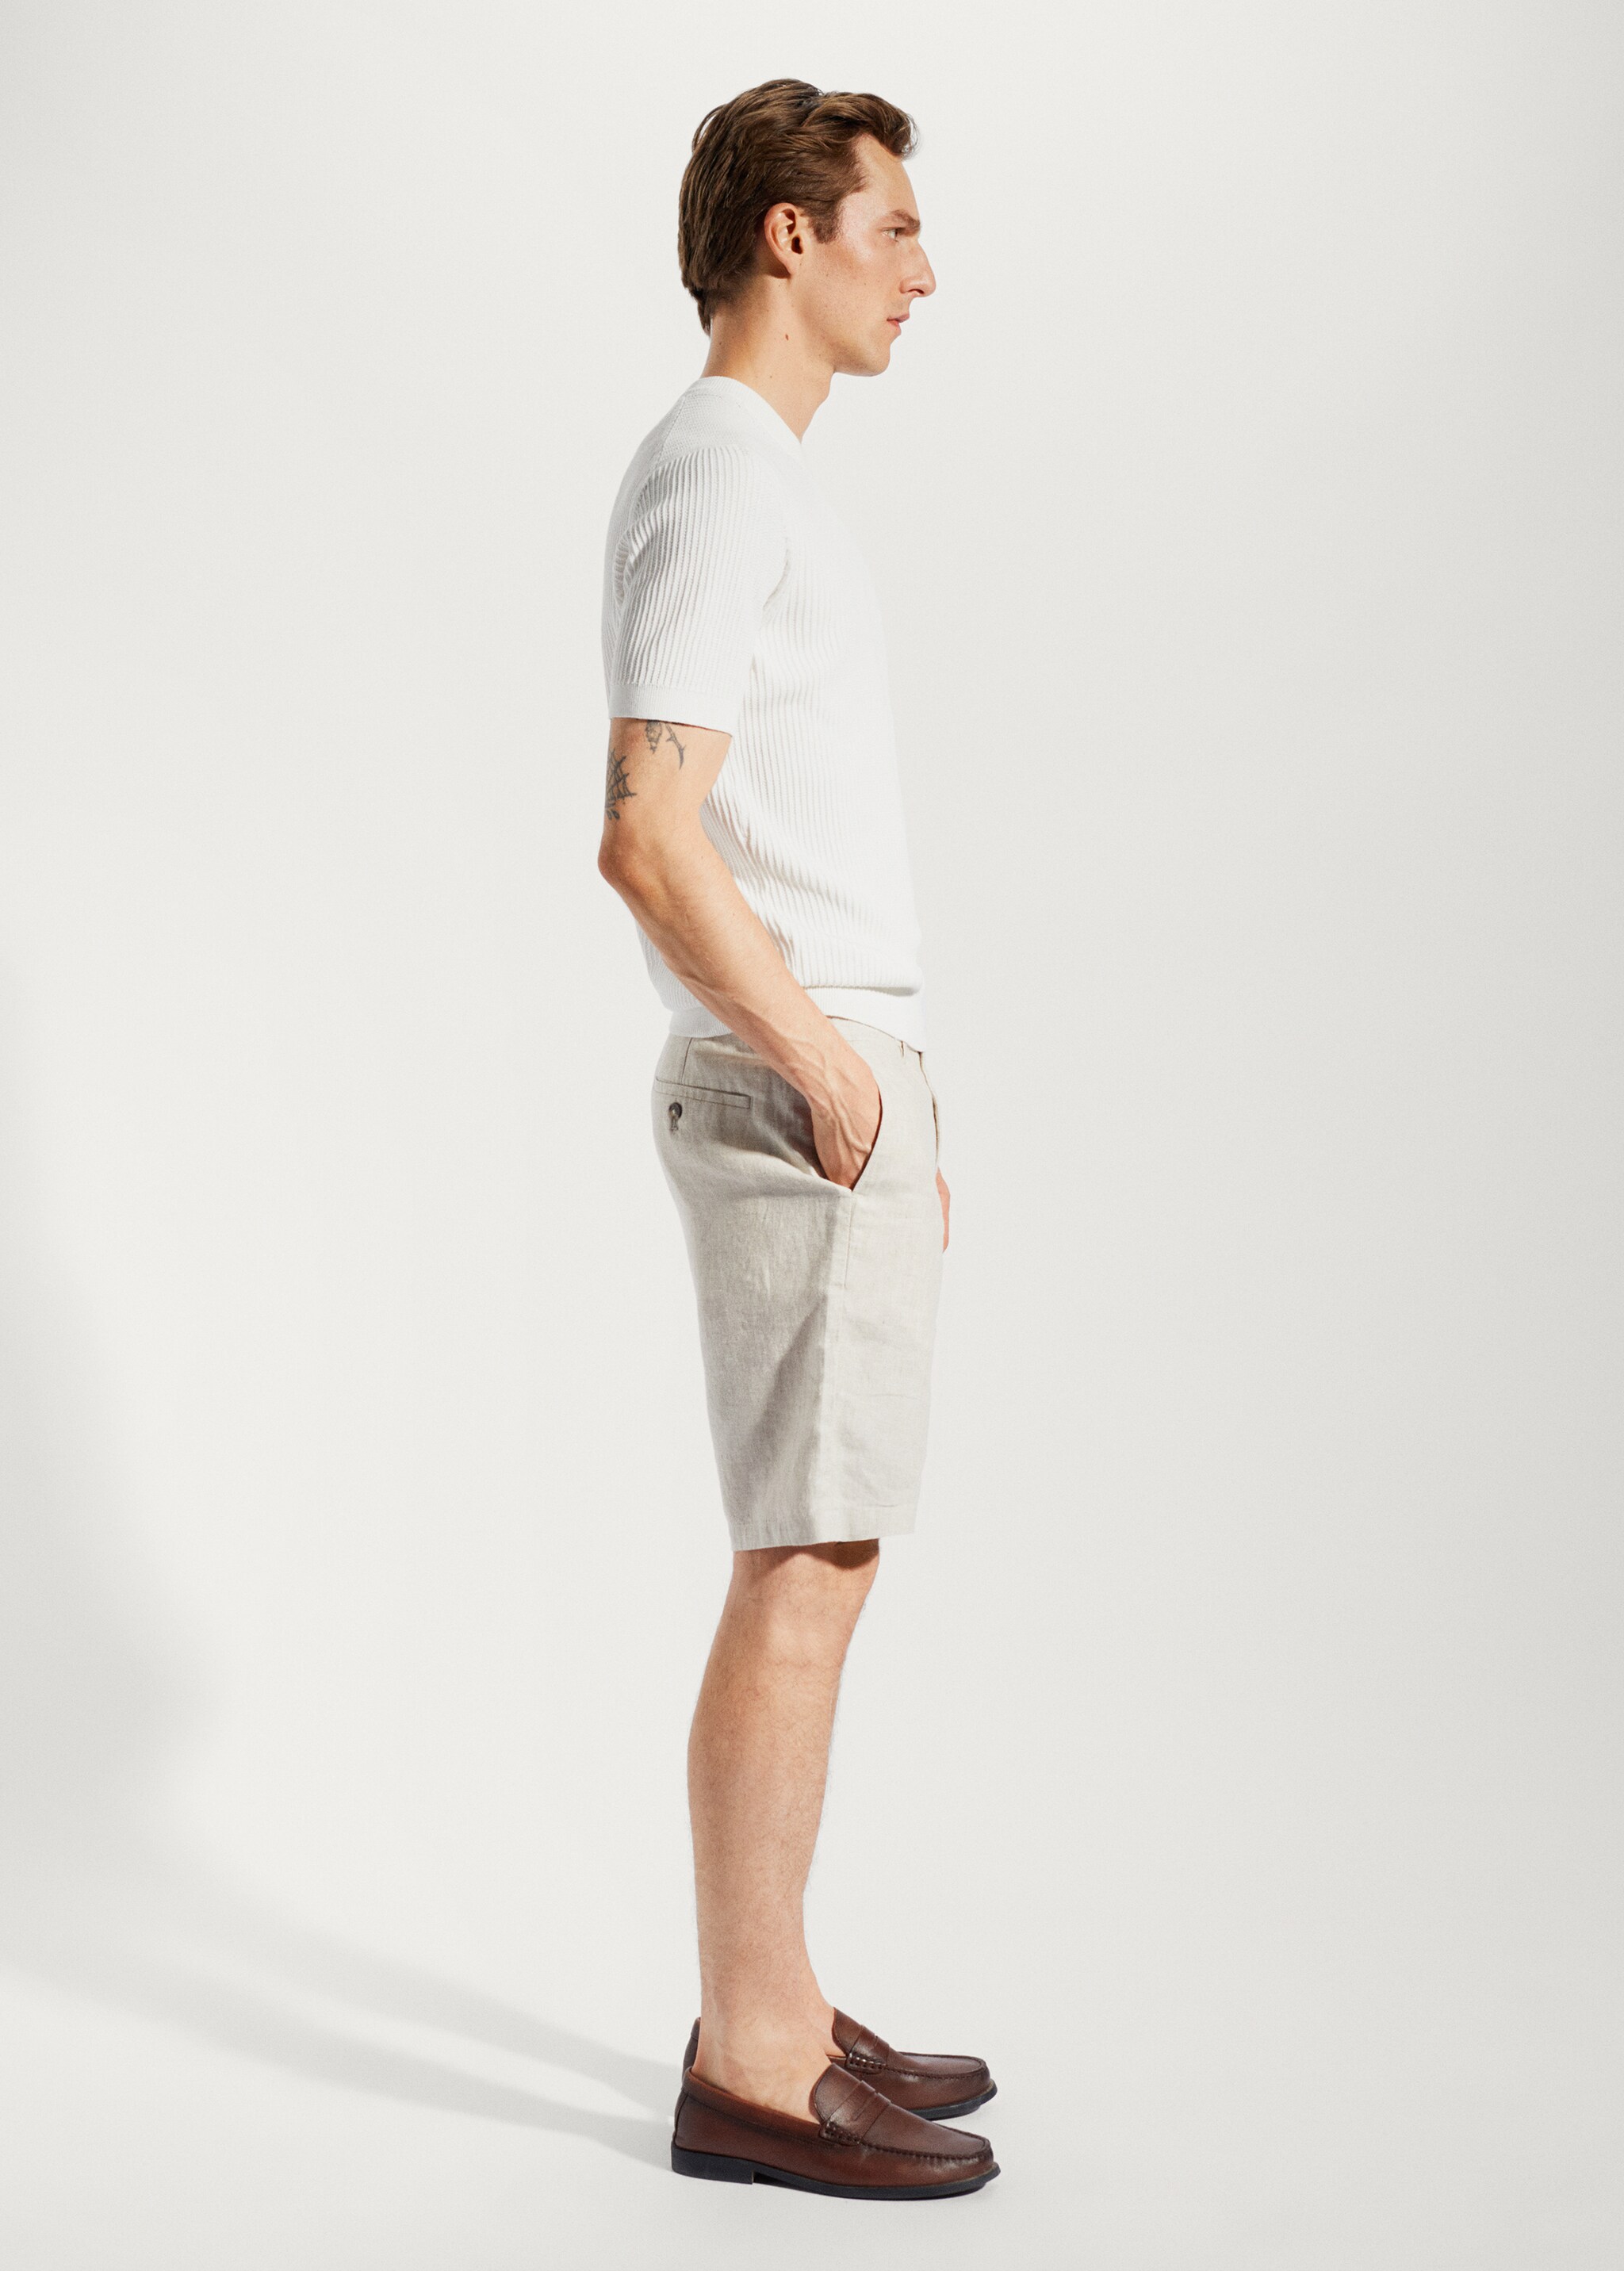 100% linen shorts - Details of the article 4